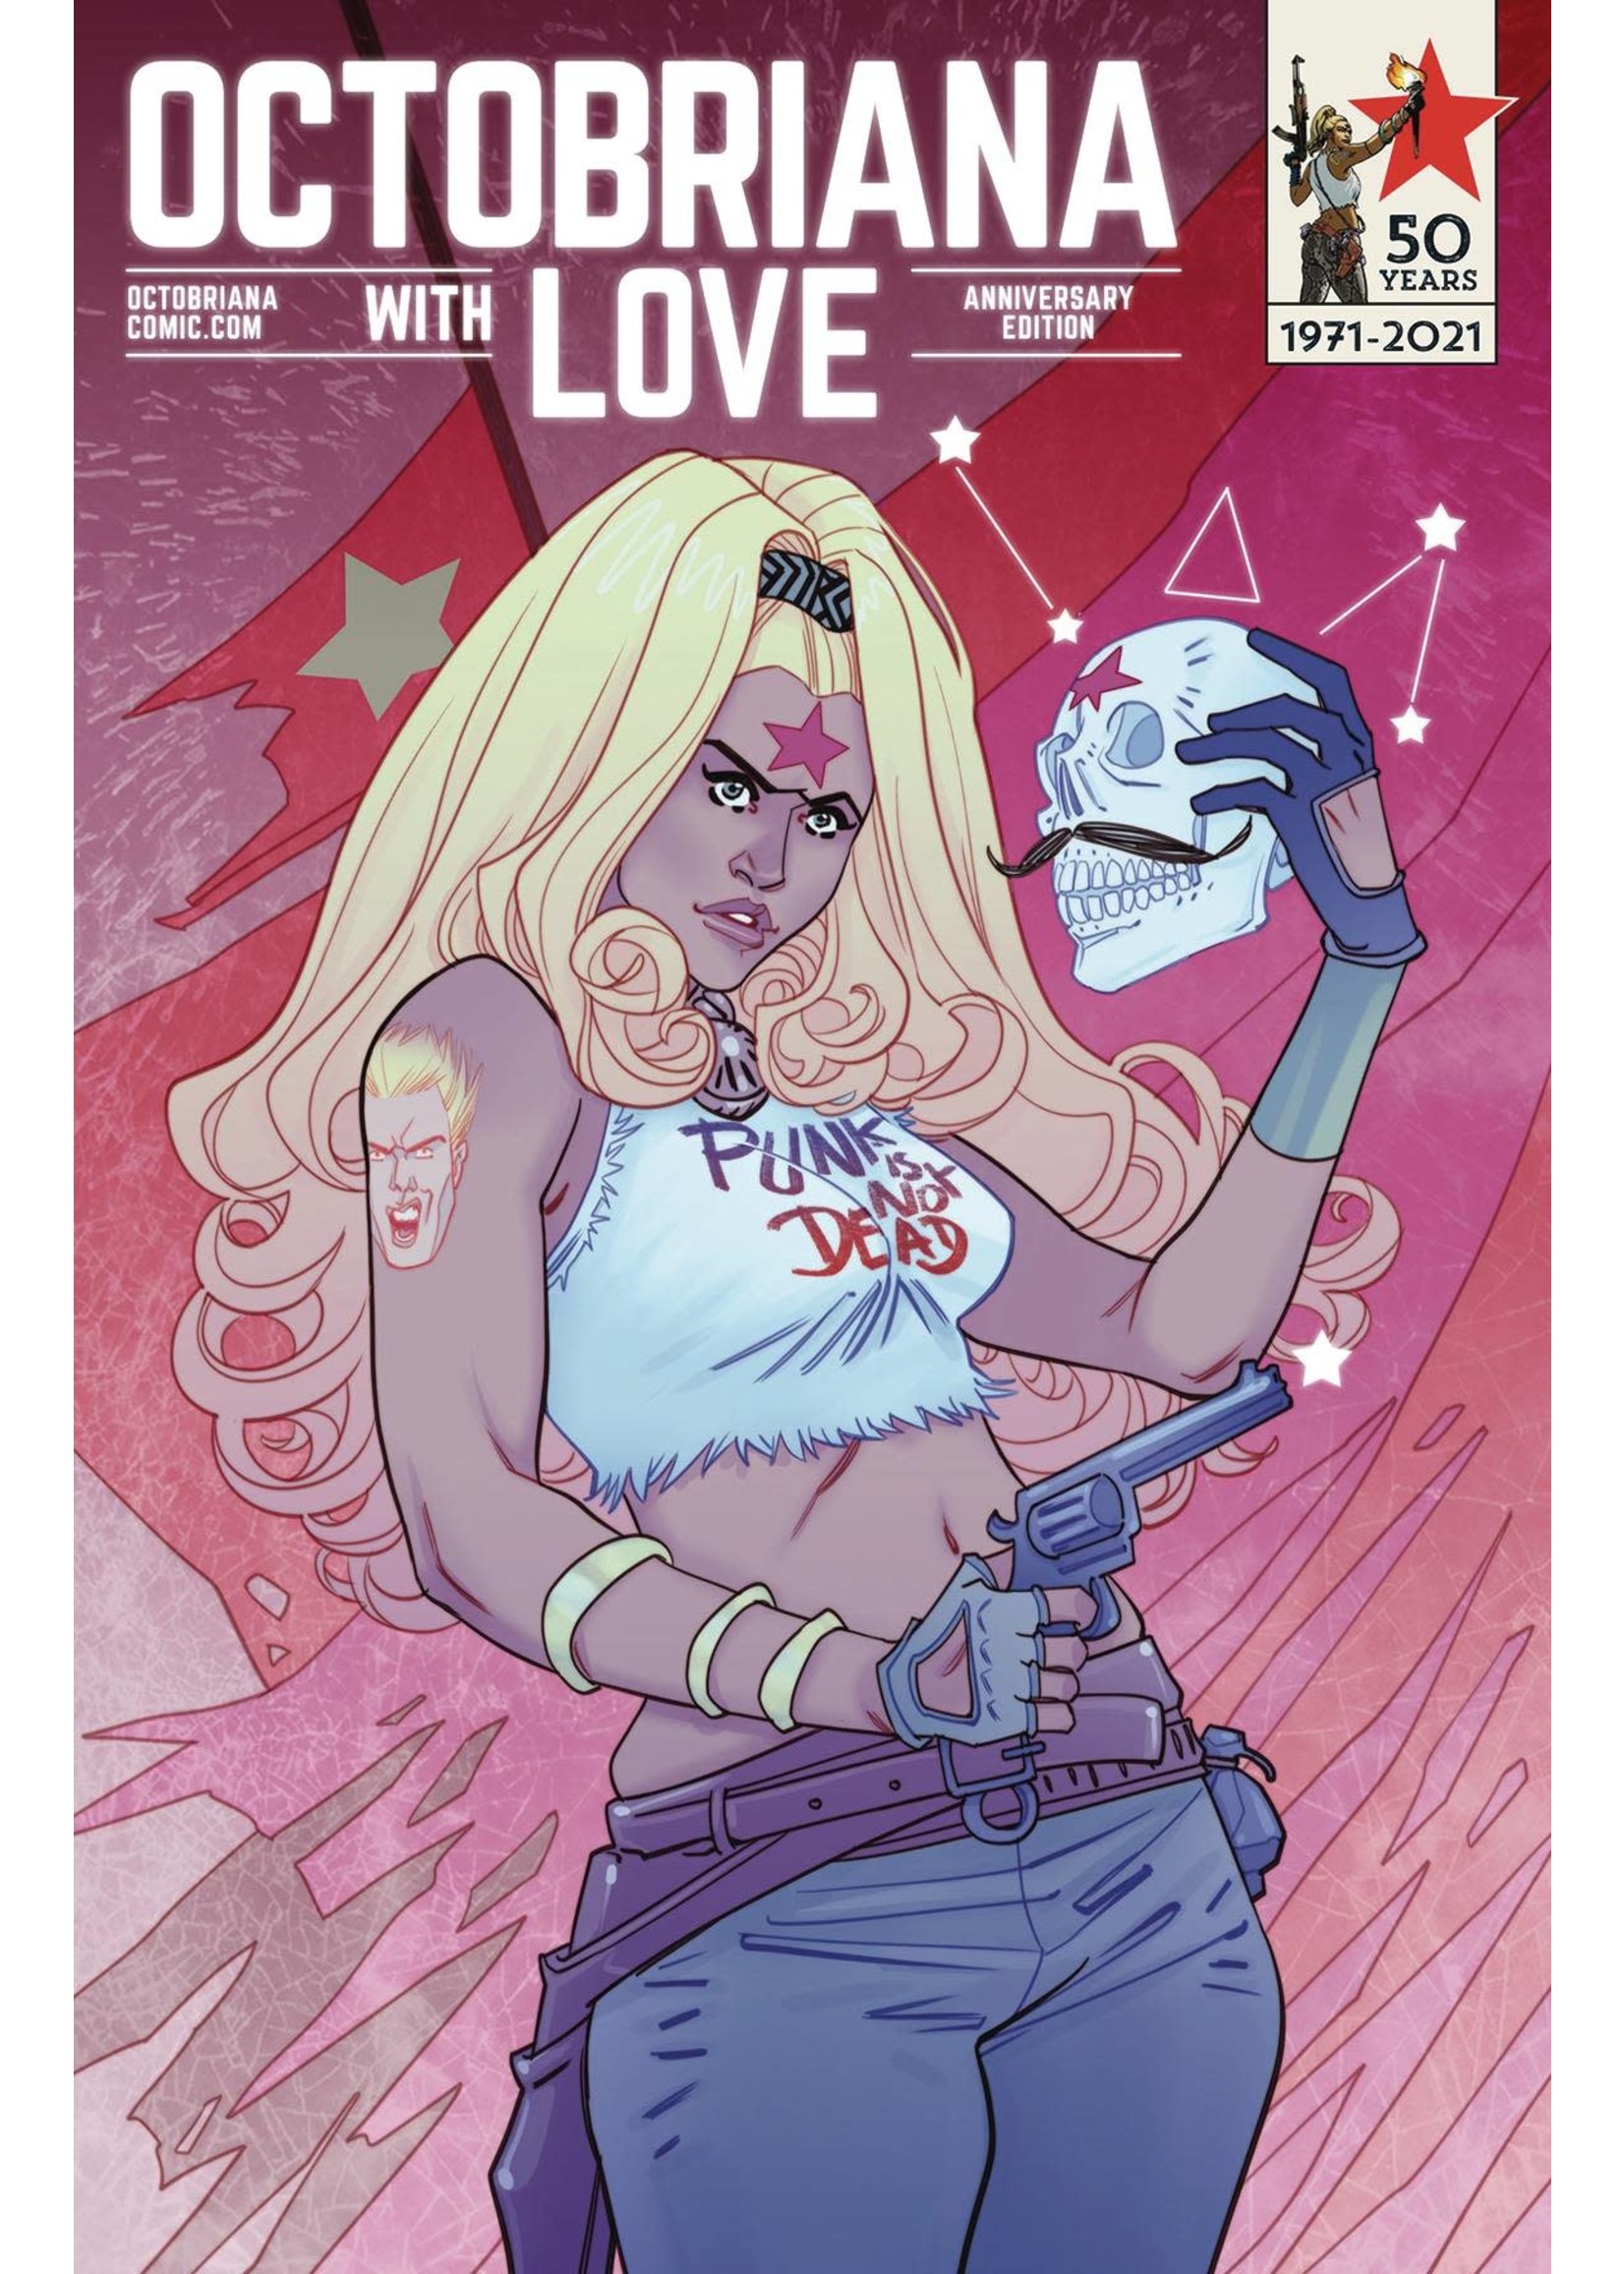 DEAD GOOD COMICS OCTOBRIANA WITH LOVE #1 CVR A MARGUERITE SAUVAGE